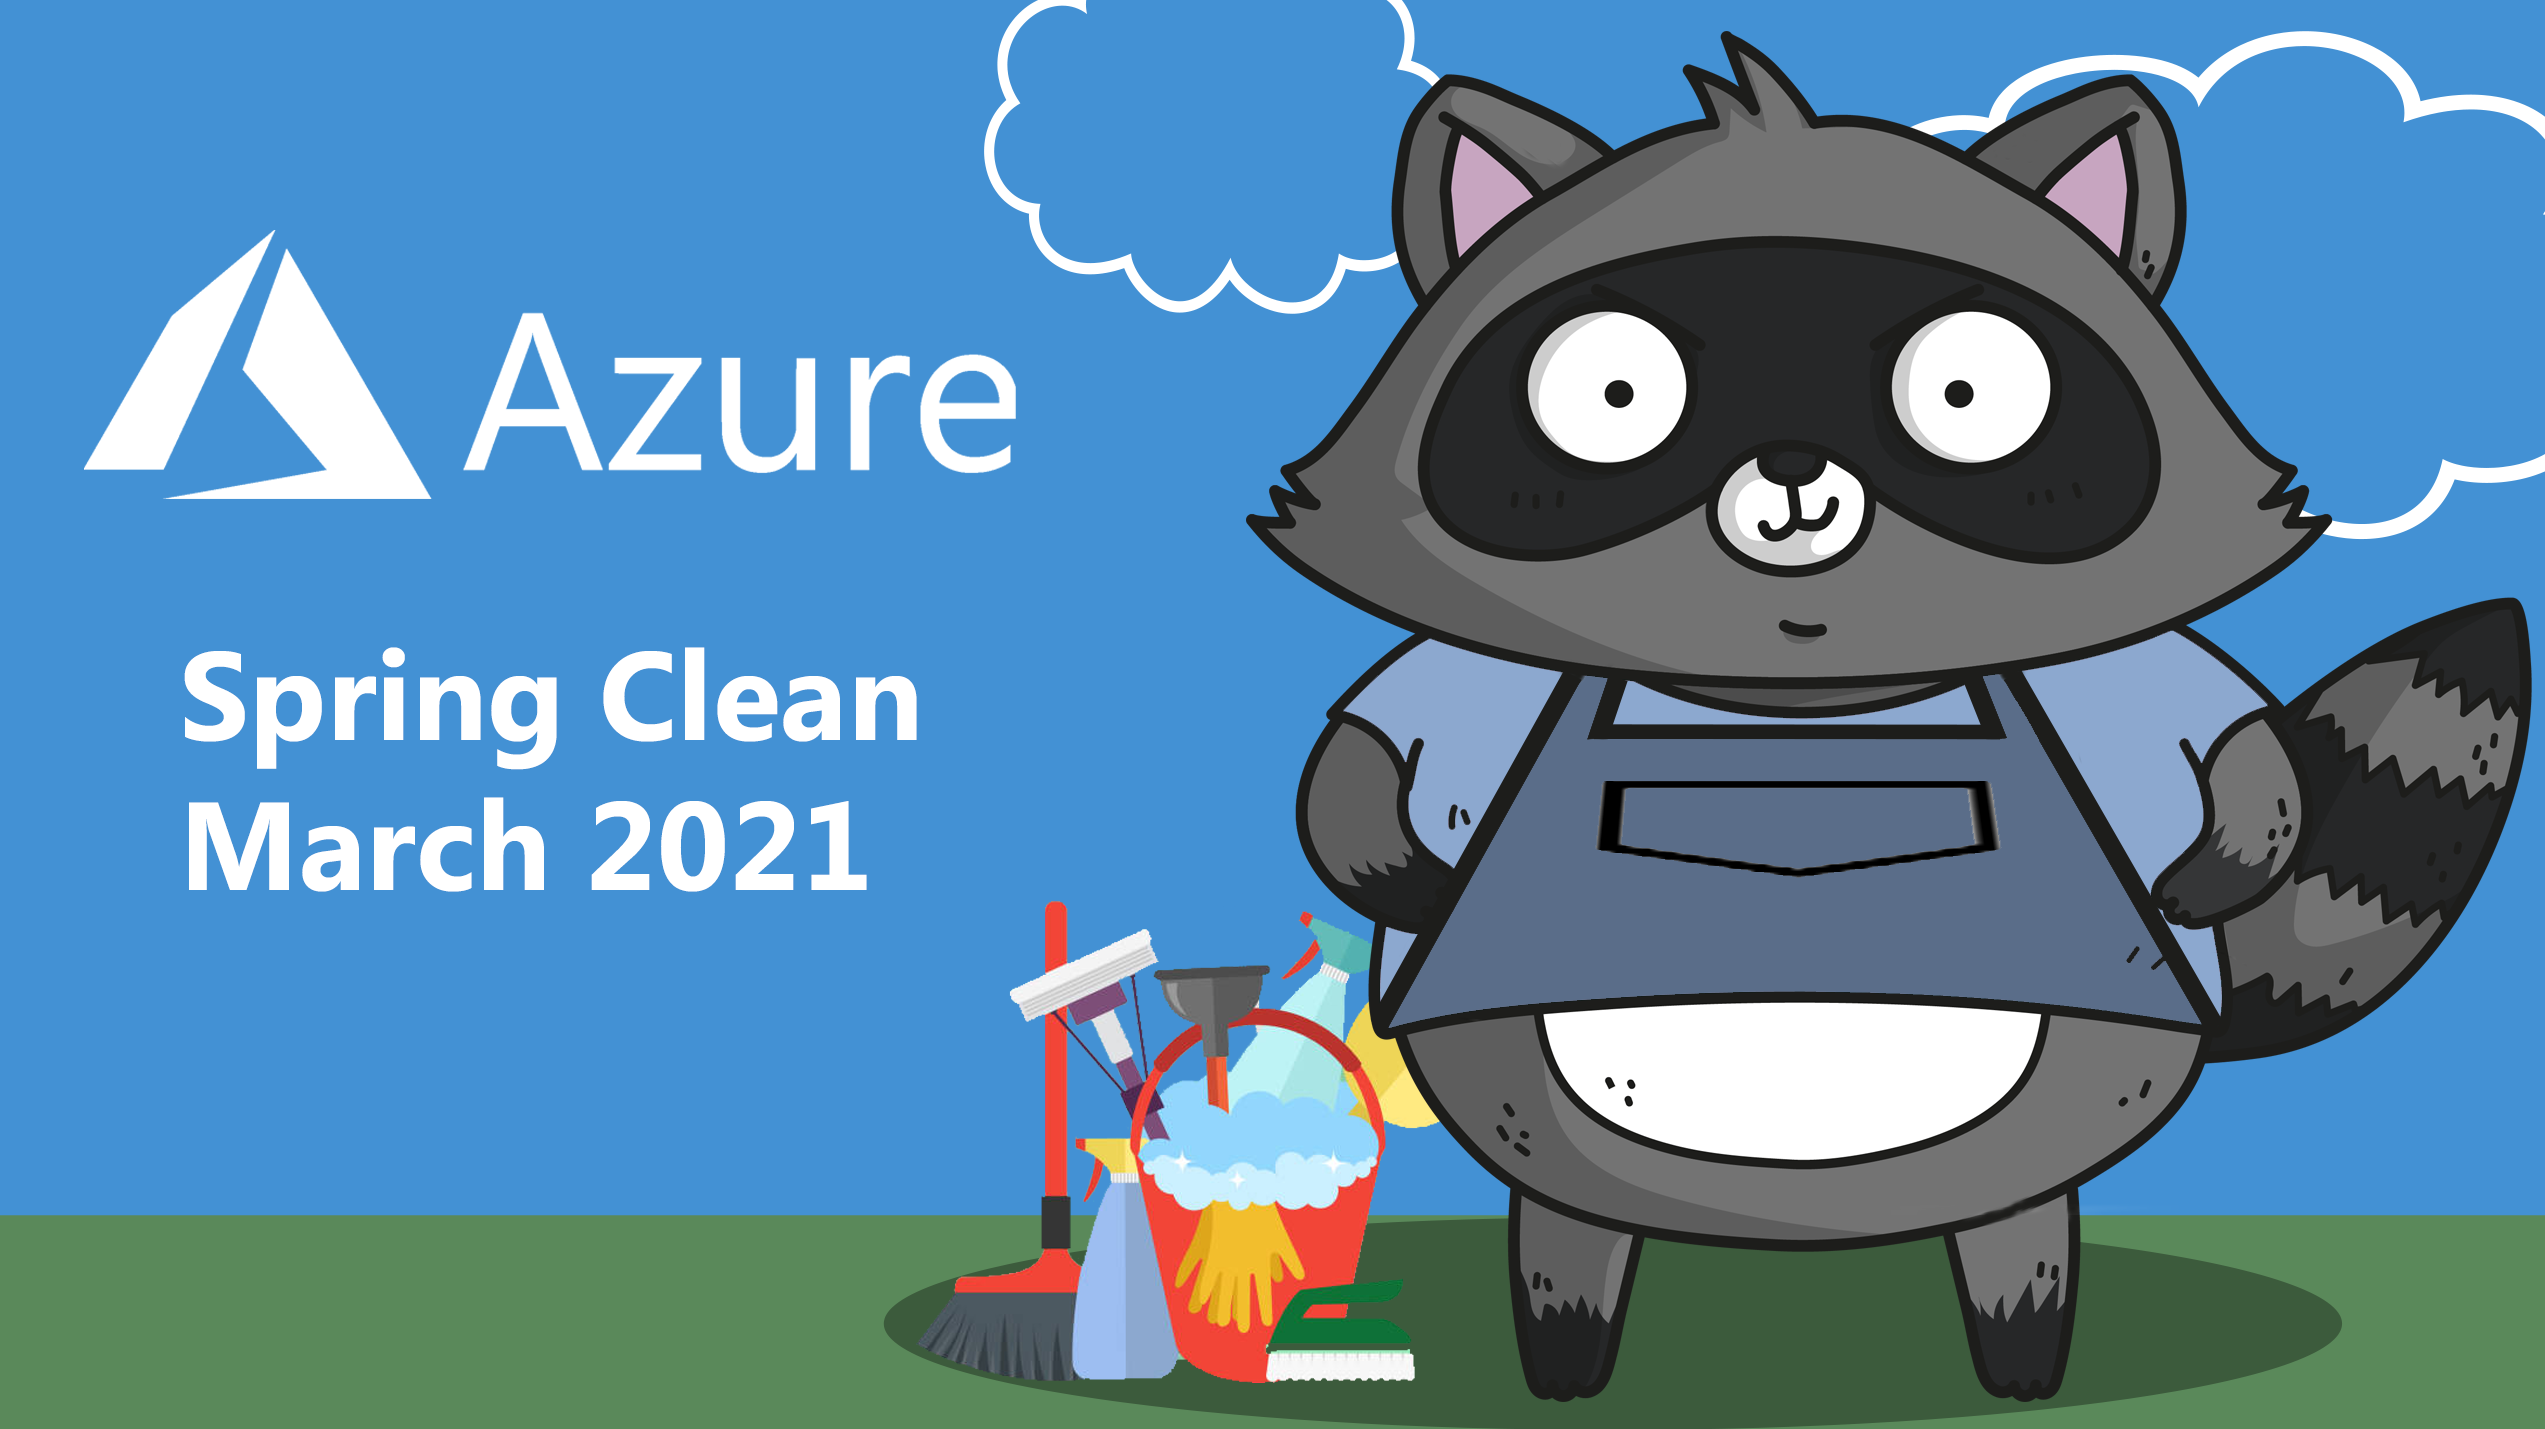 Azure Spring Clean - Managing your Non-Production Azure Environments